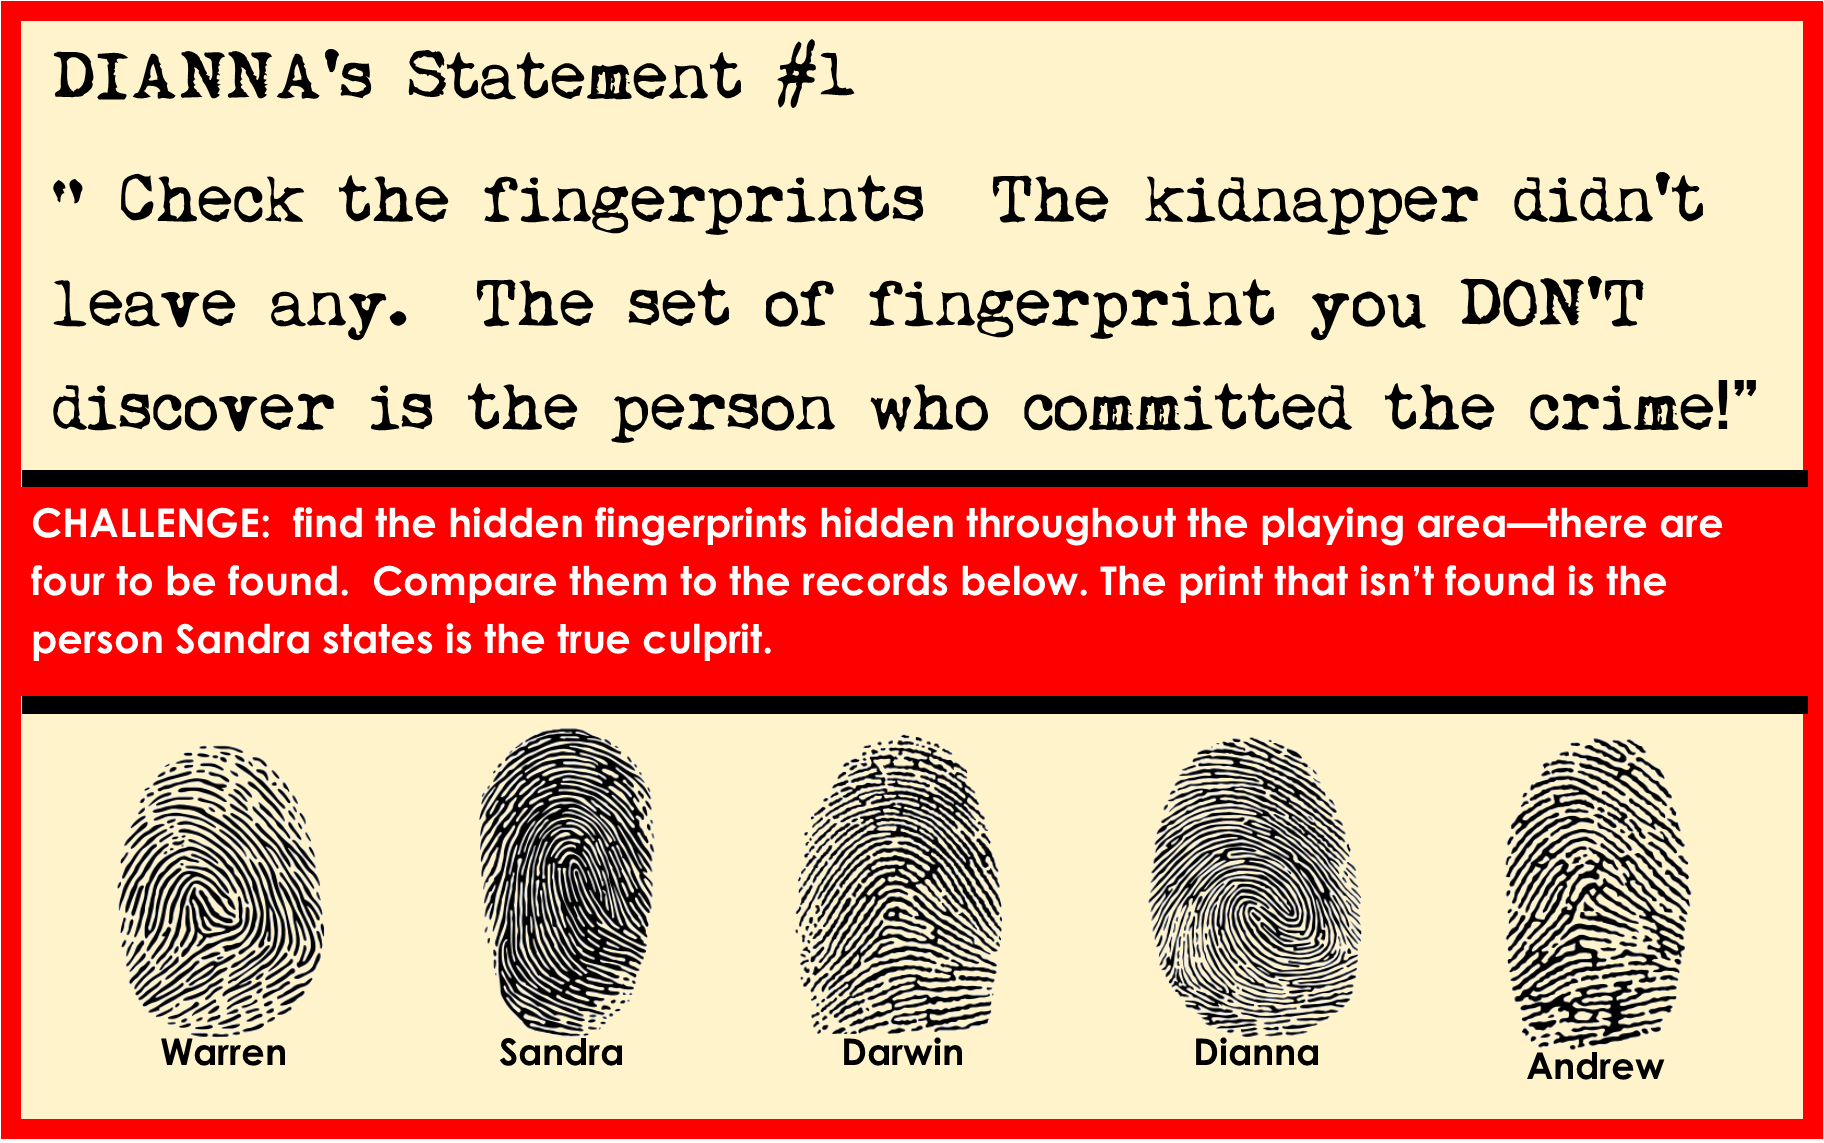 printable-detective-party-game-for-kids